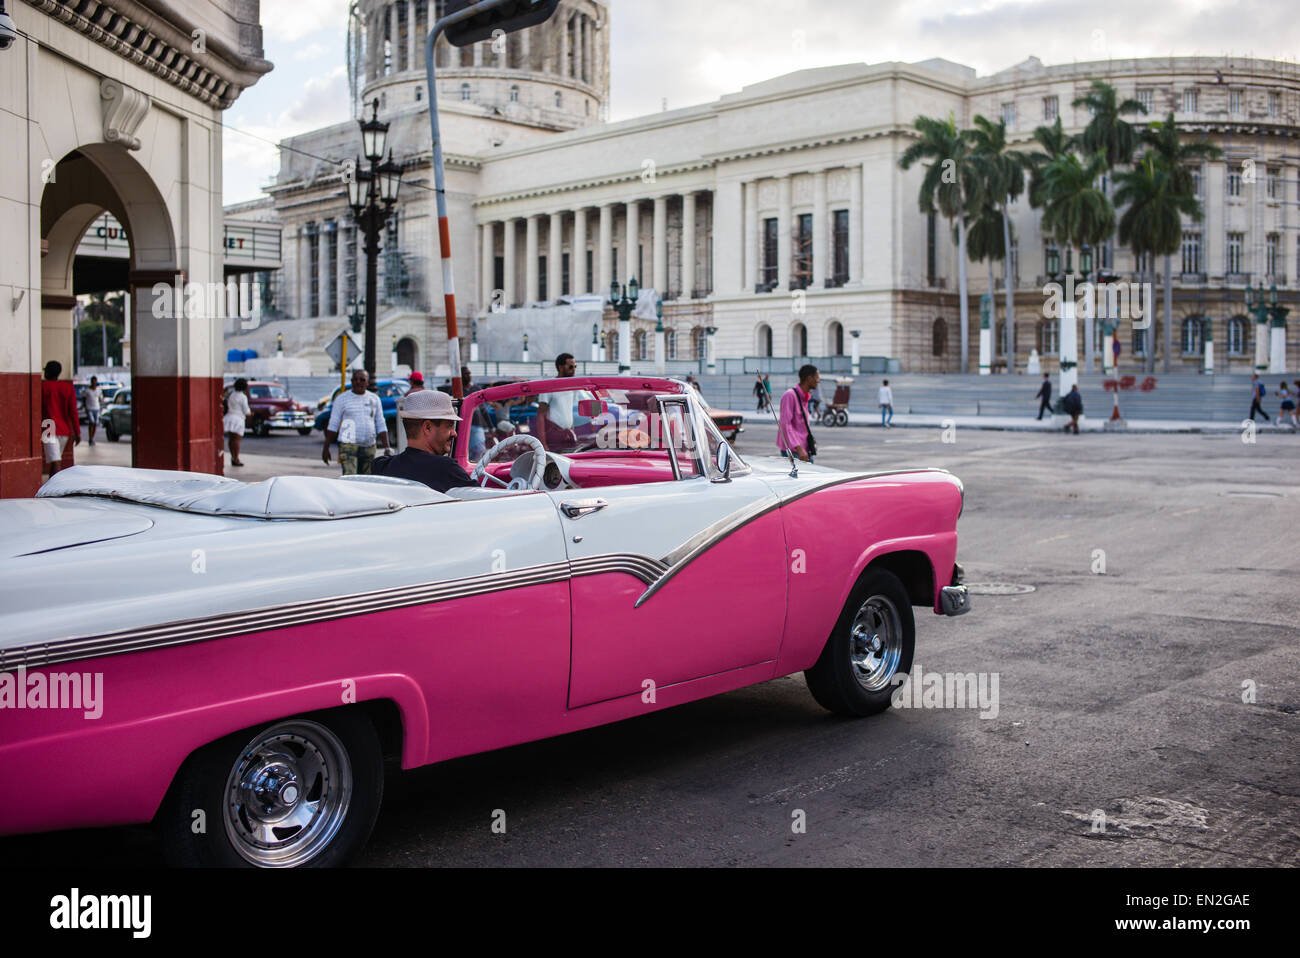 Vintage pink and white Ford convertible used as a taxi on the streets ...